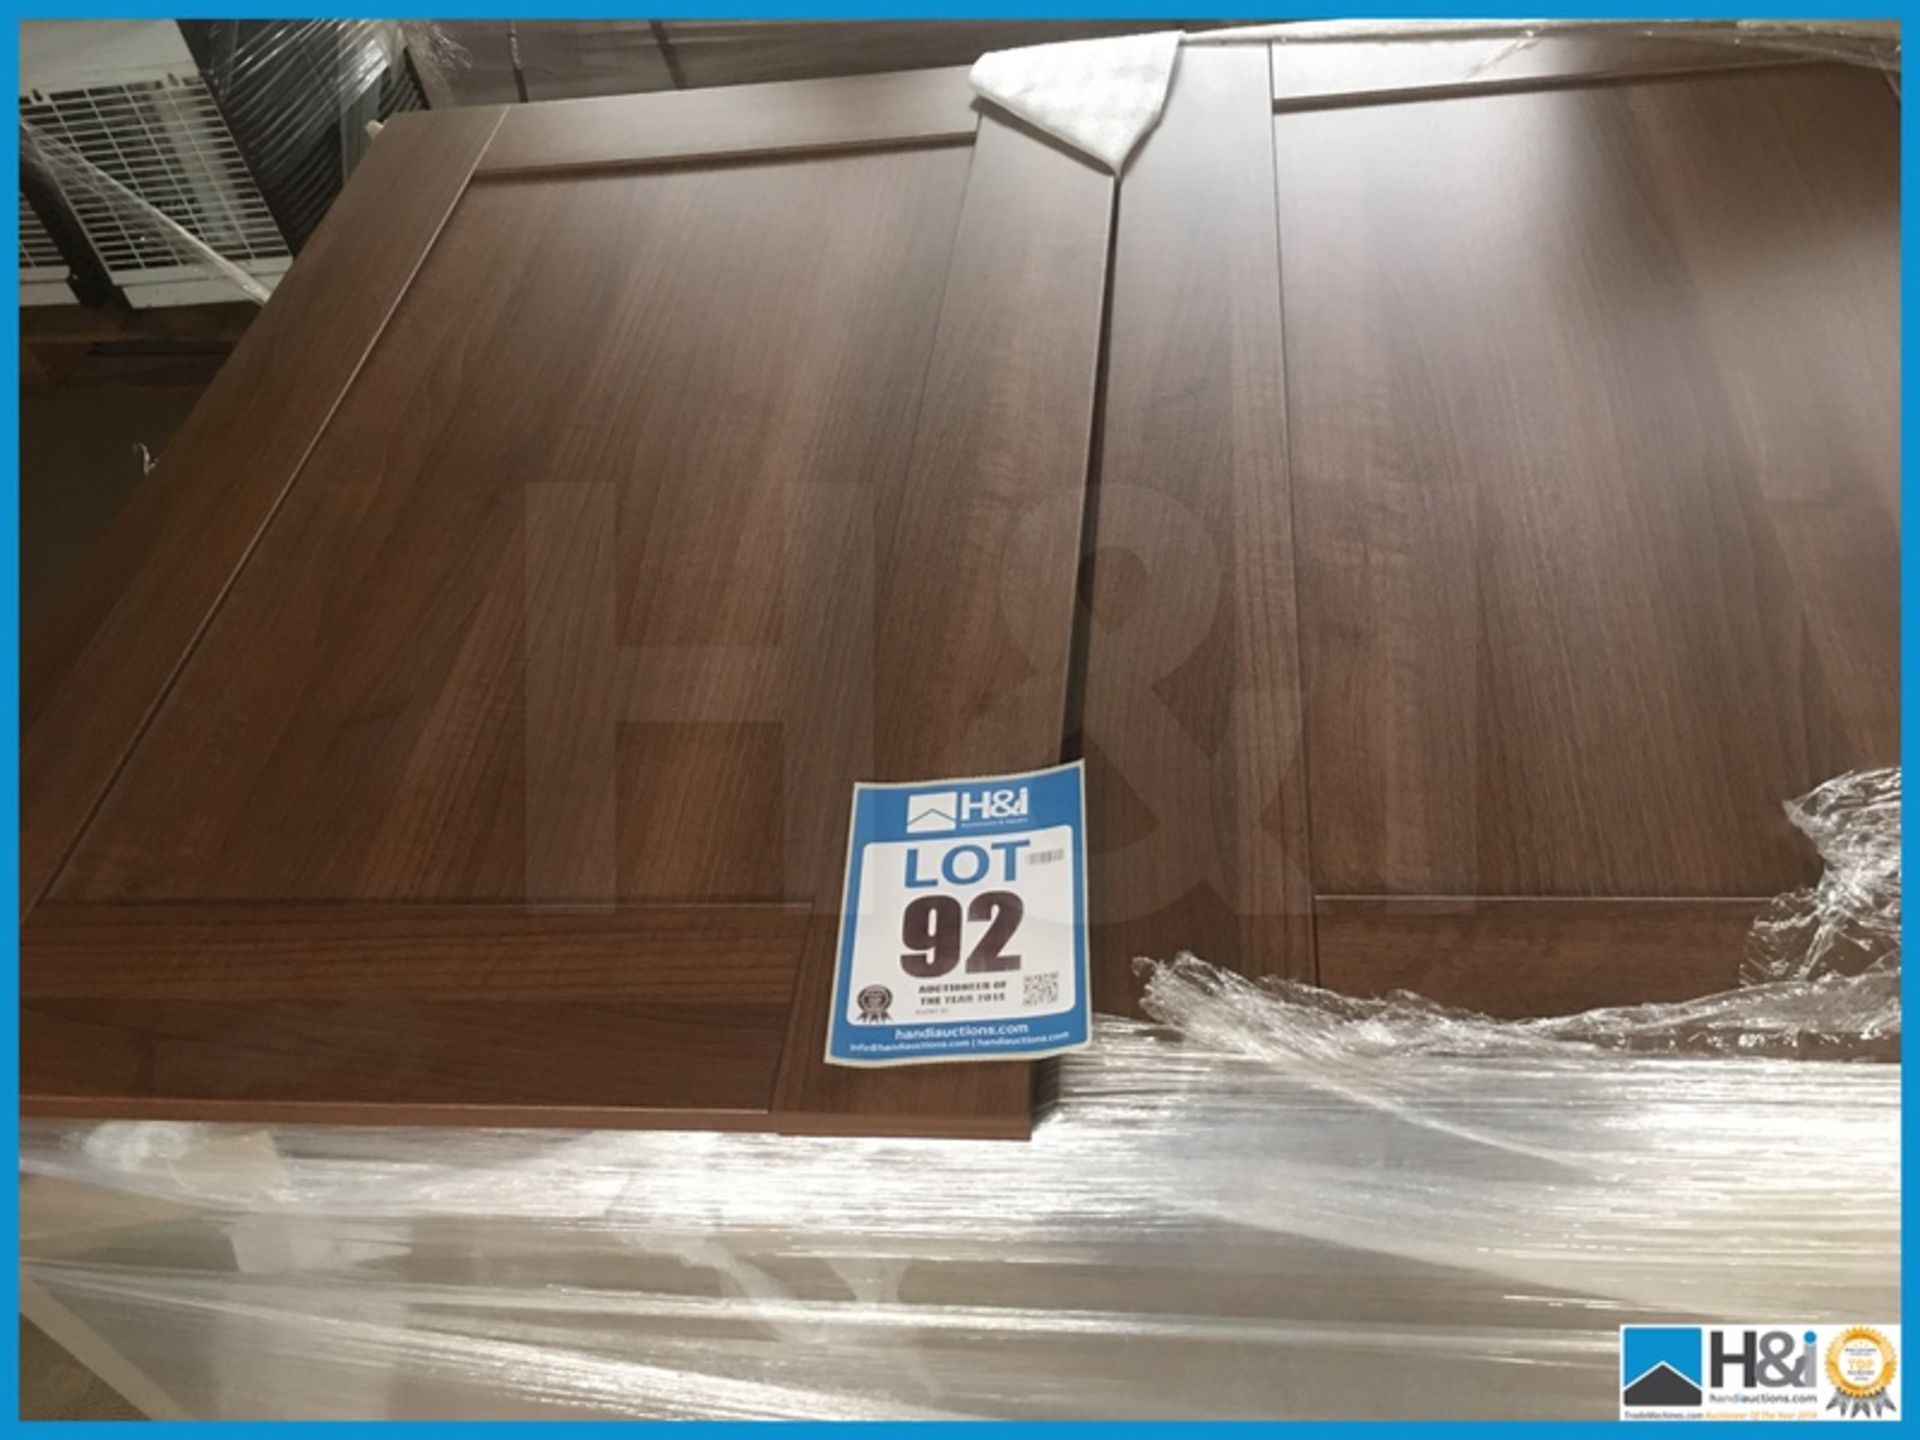 Approx x 50 895mm X 995 mm American walnut contemporary kitchen door with retail value of lot £2950.